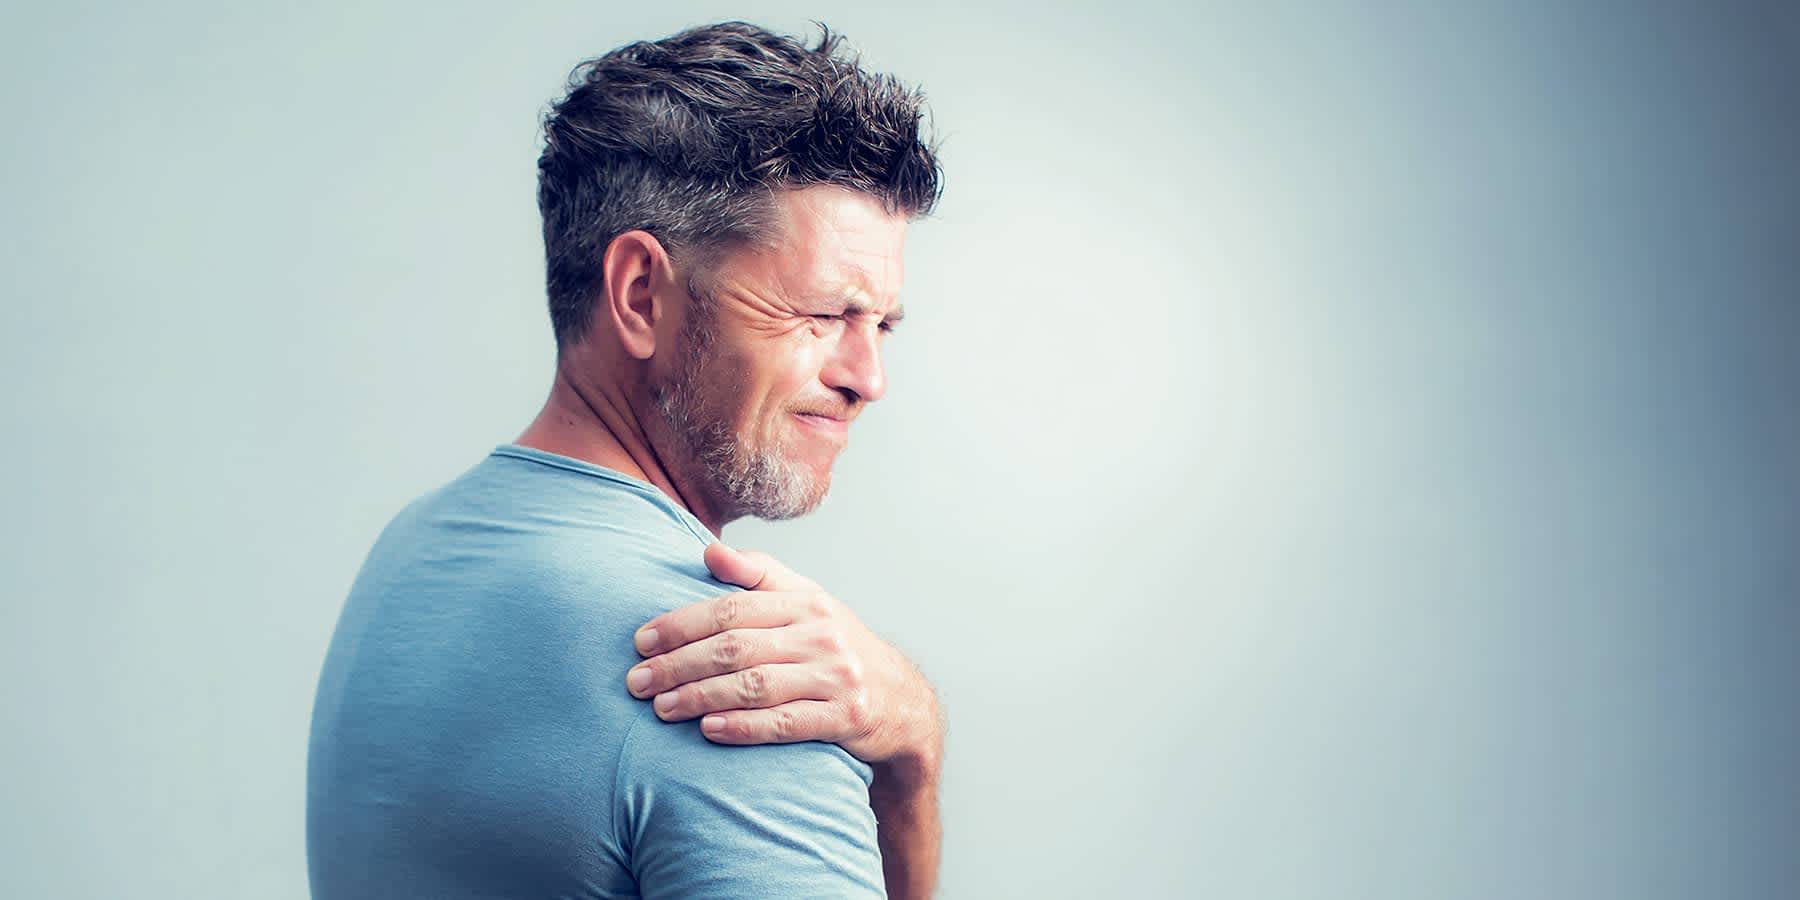 Common causes of muscle pain and how you can address - Blog | Everlywell: Home Health Made Easy